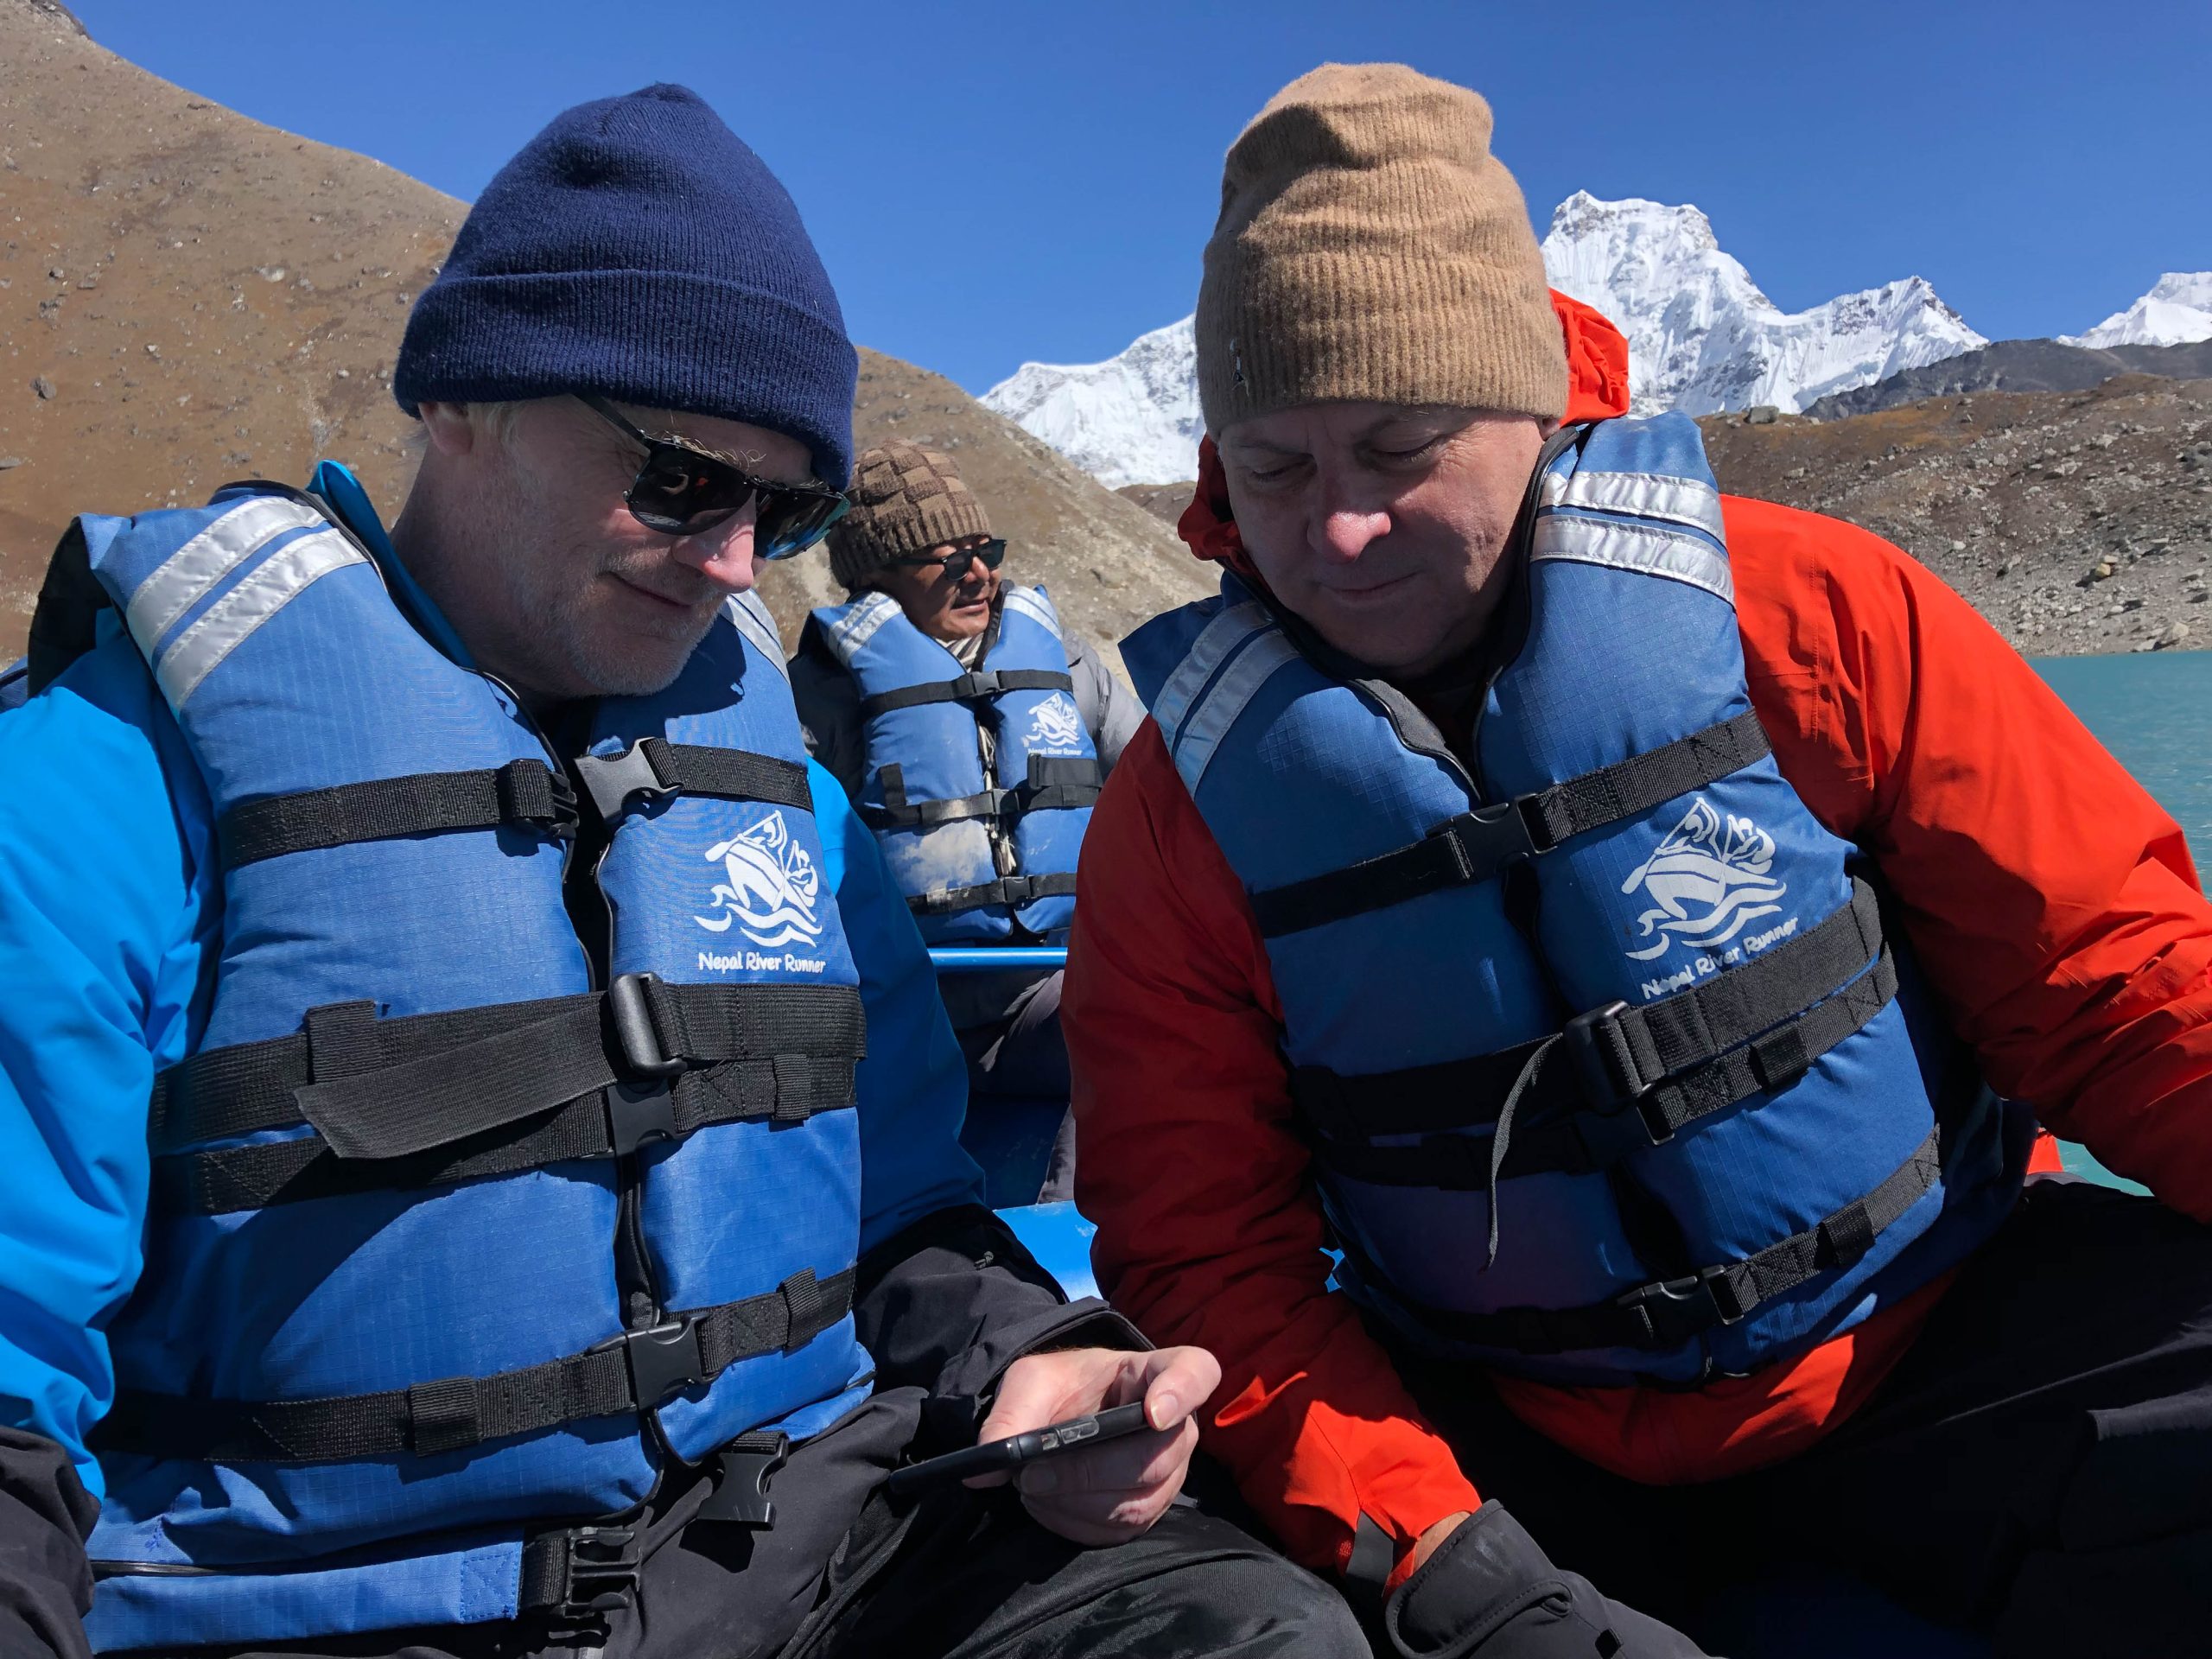 Seim and McLaughlin examining lake depth data. (photo by Emily Eidam) Closeup of the two men in the boat with warm hats and vests and other gear